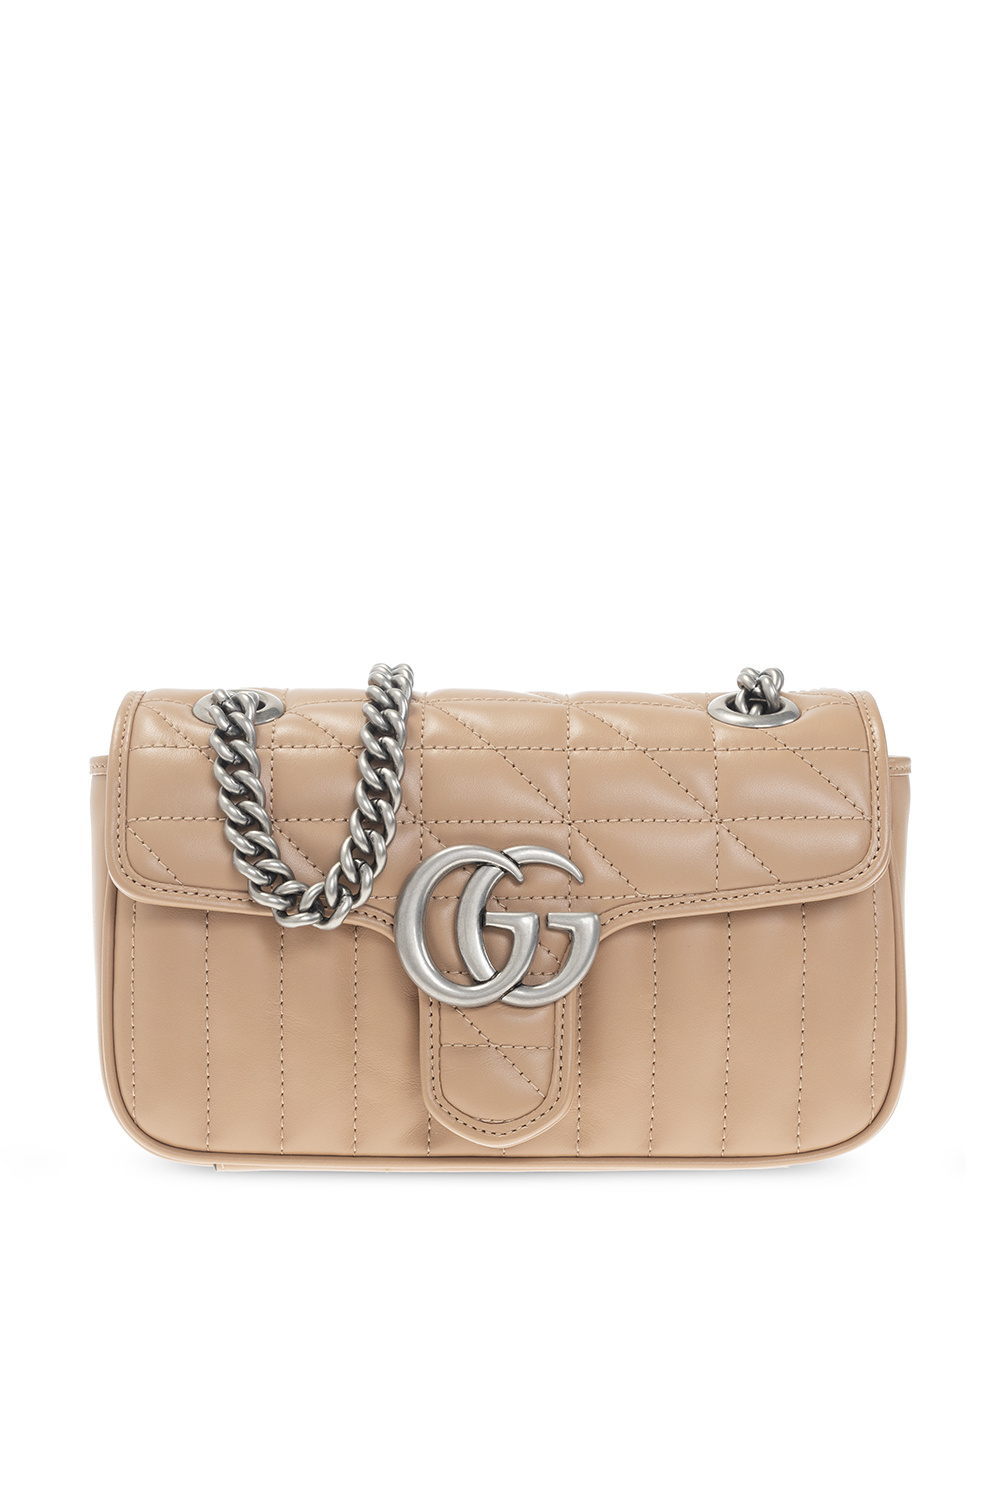 Choose your size of Gucci 2020 Marmont bag with us – hey it's